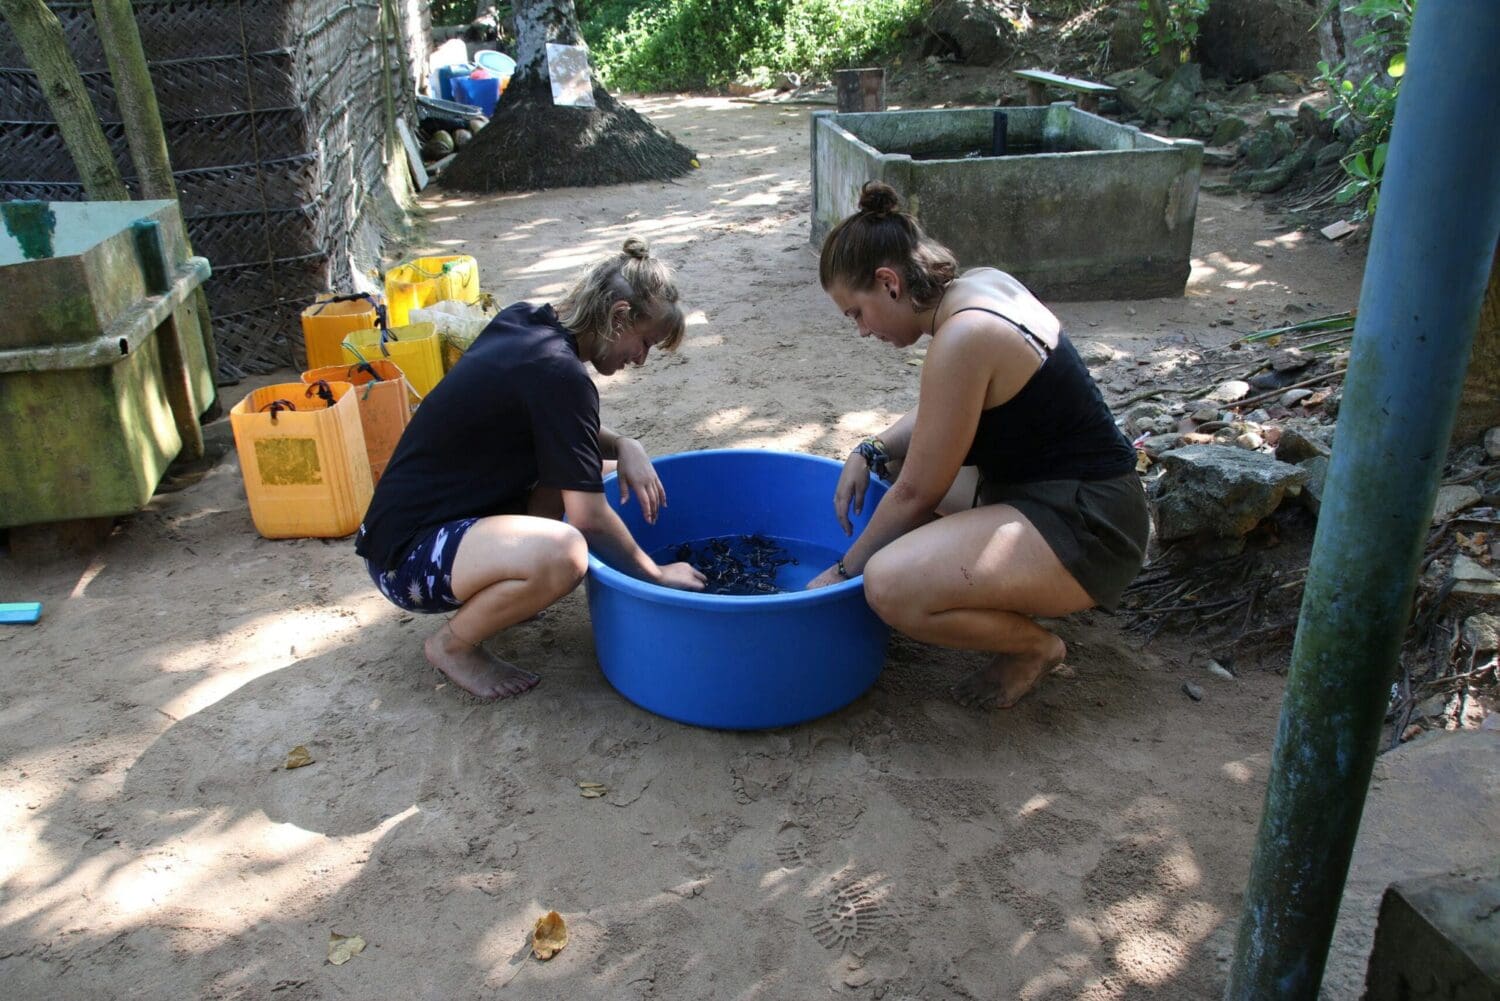 Volunteers at the sea turtle conservation program